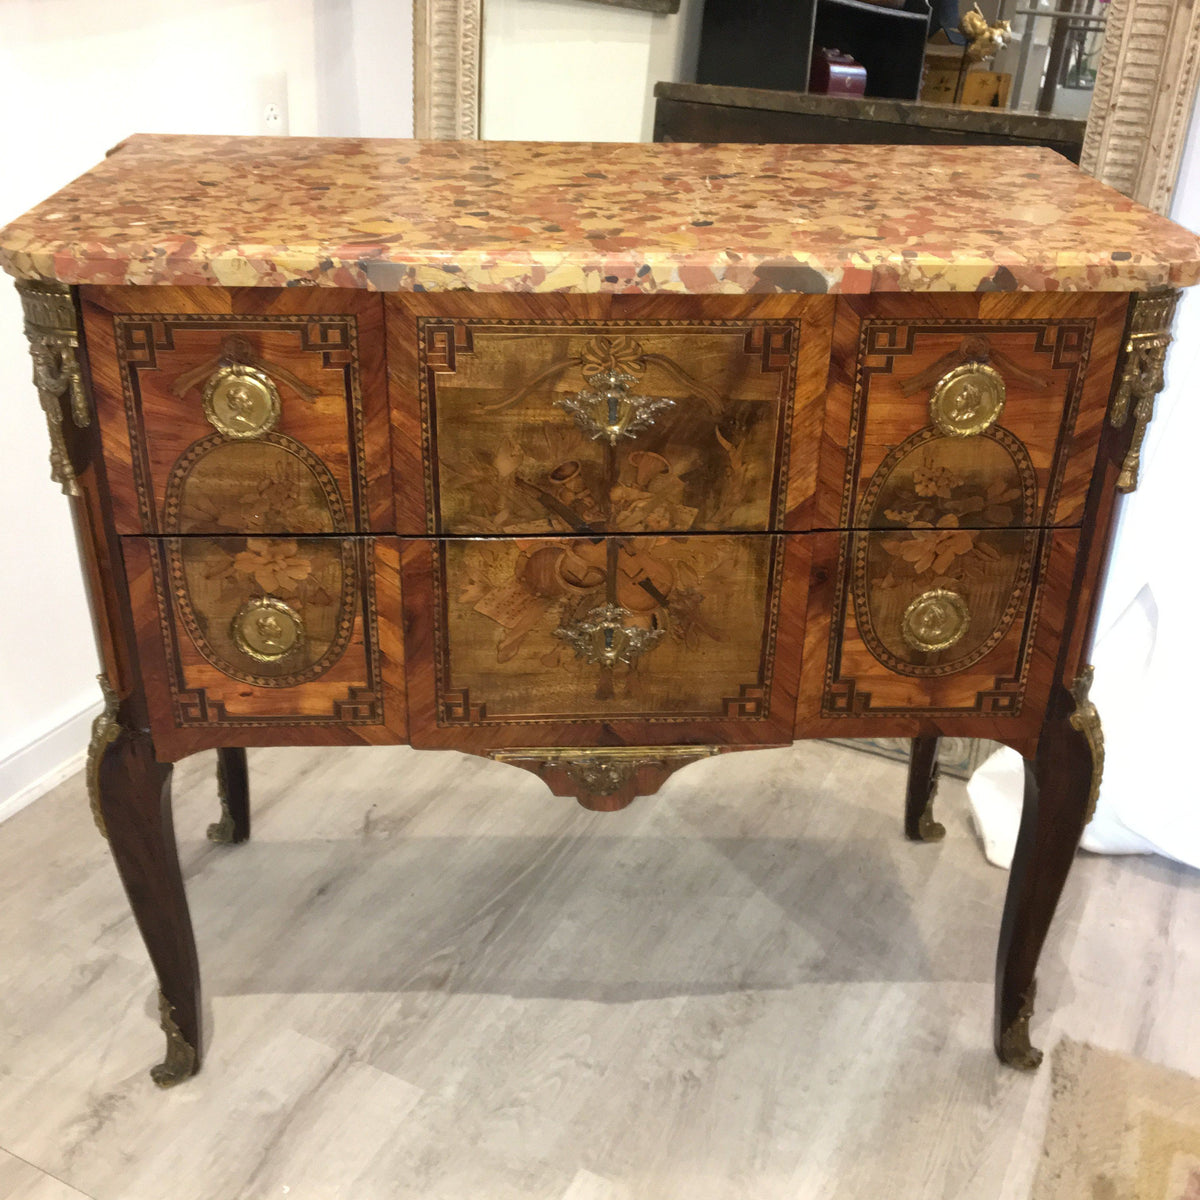 ON HOLD - Louis XVI two-drawer commode signed Francois Rubestuck, c. 1765 - Helen Storey Antiques